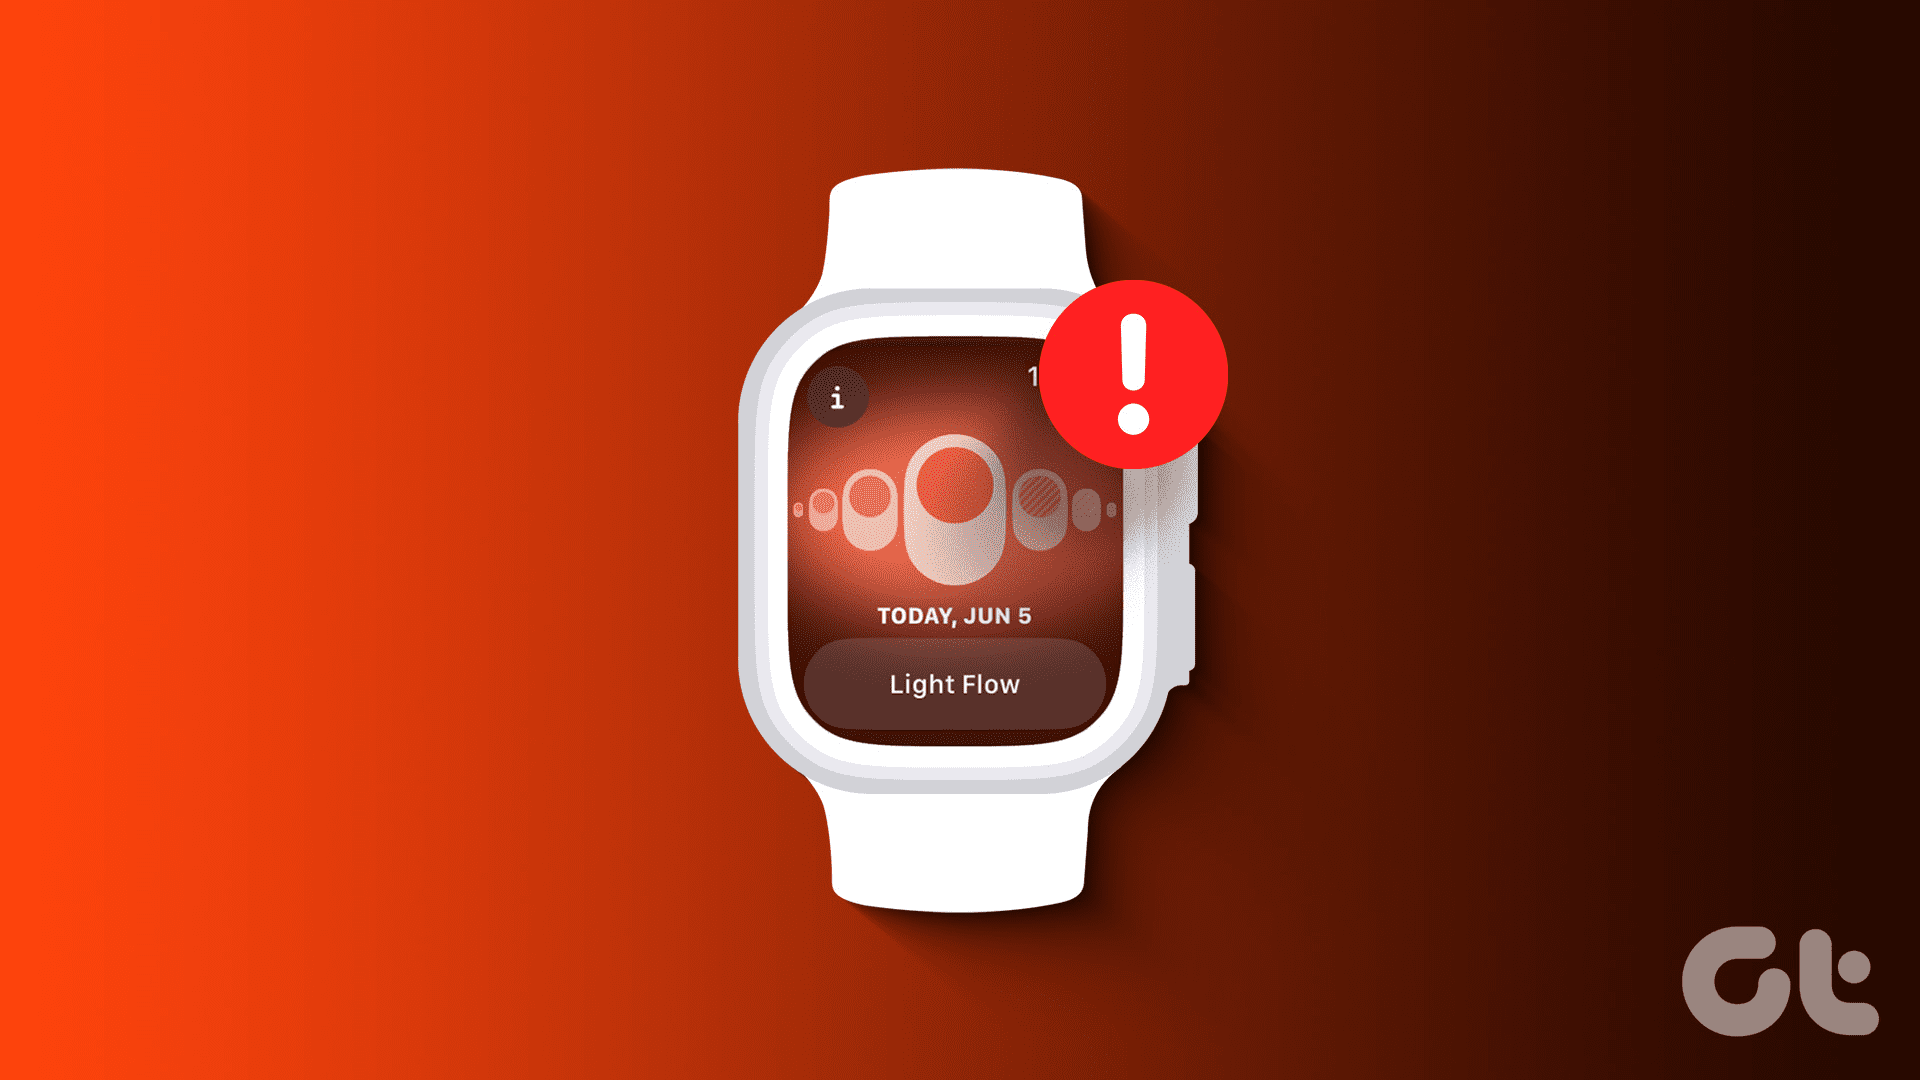 Period Cycle Tracking Not Working on Apple Watch